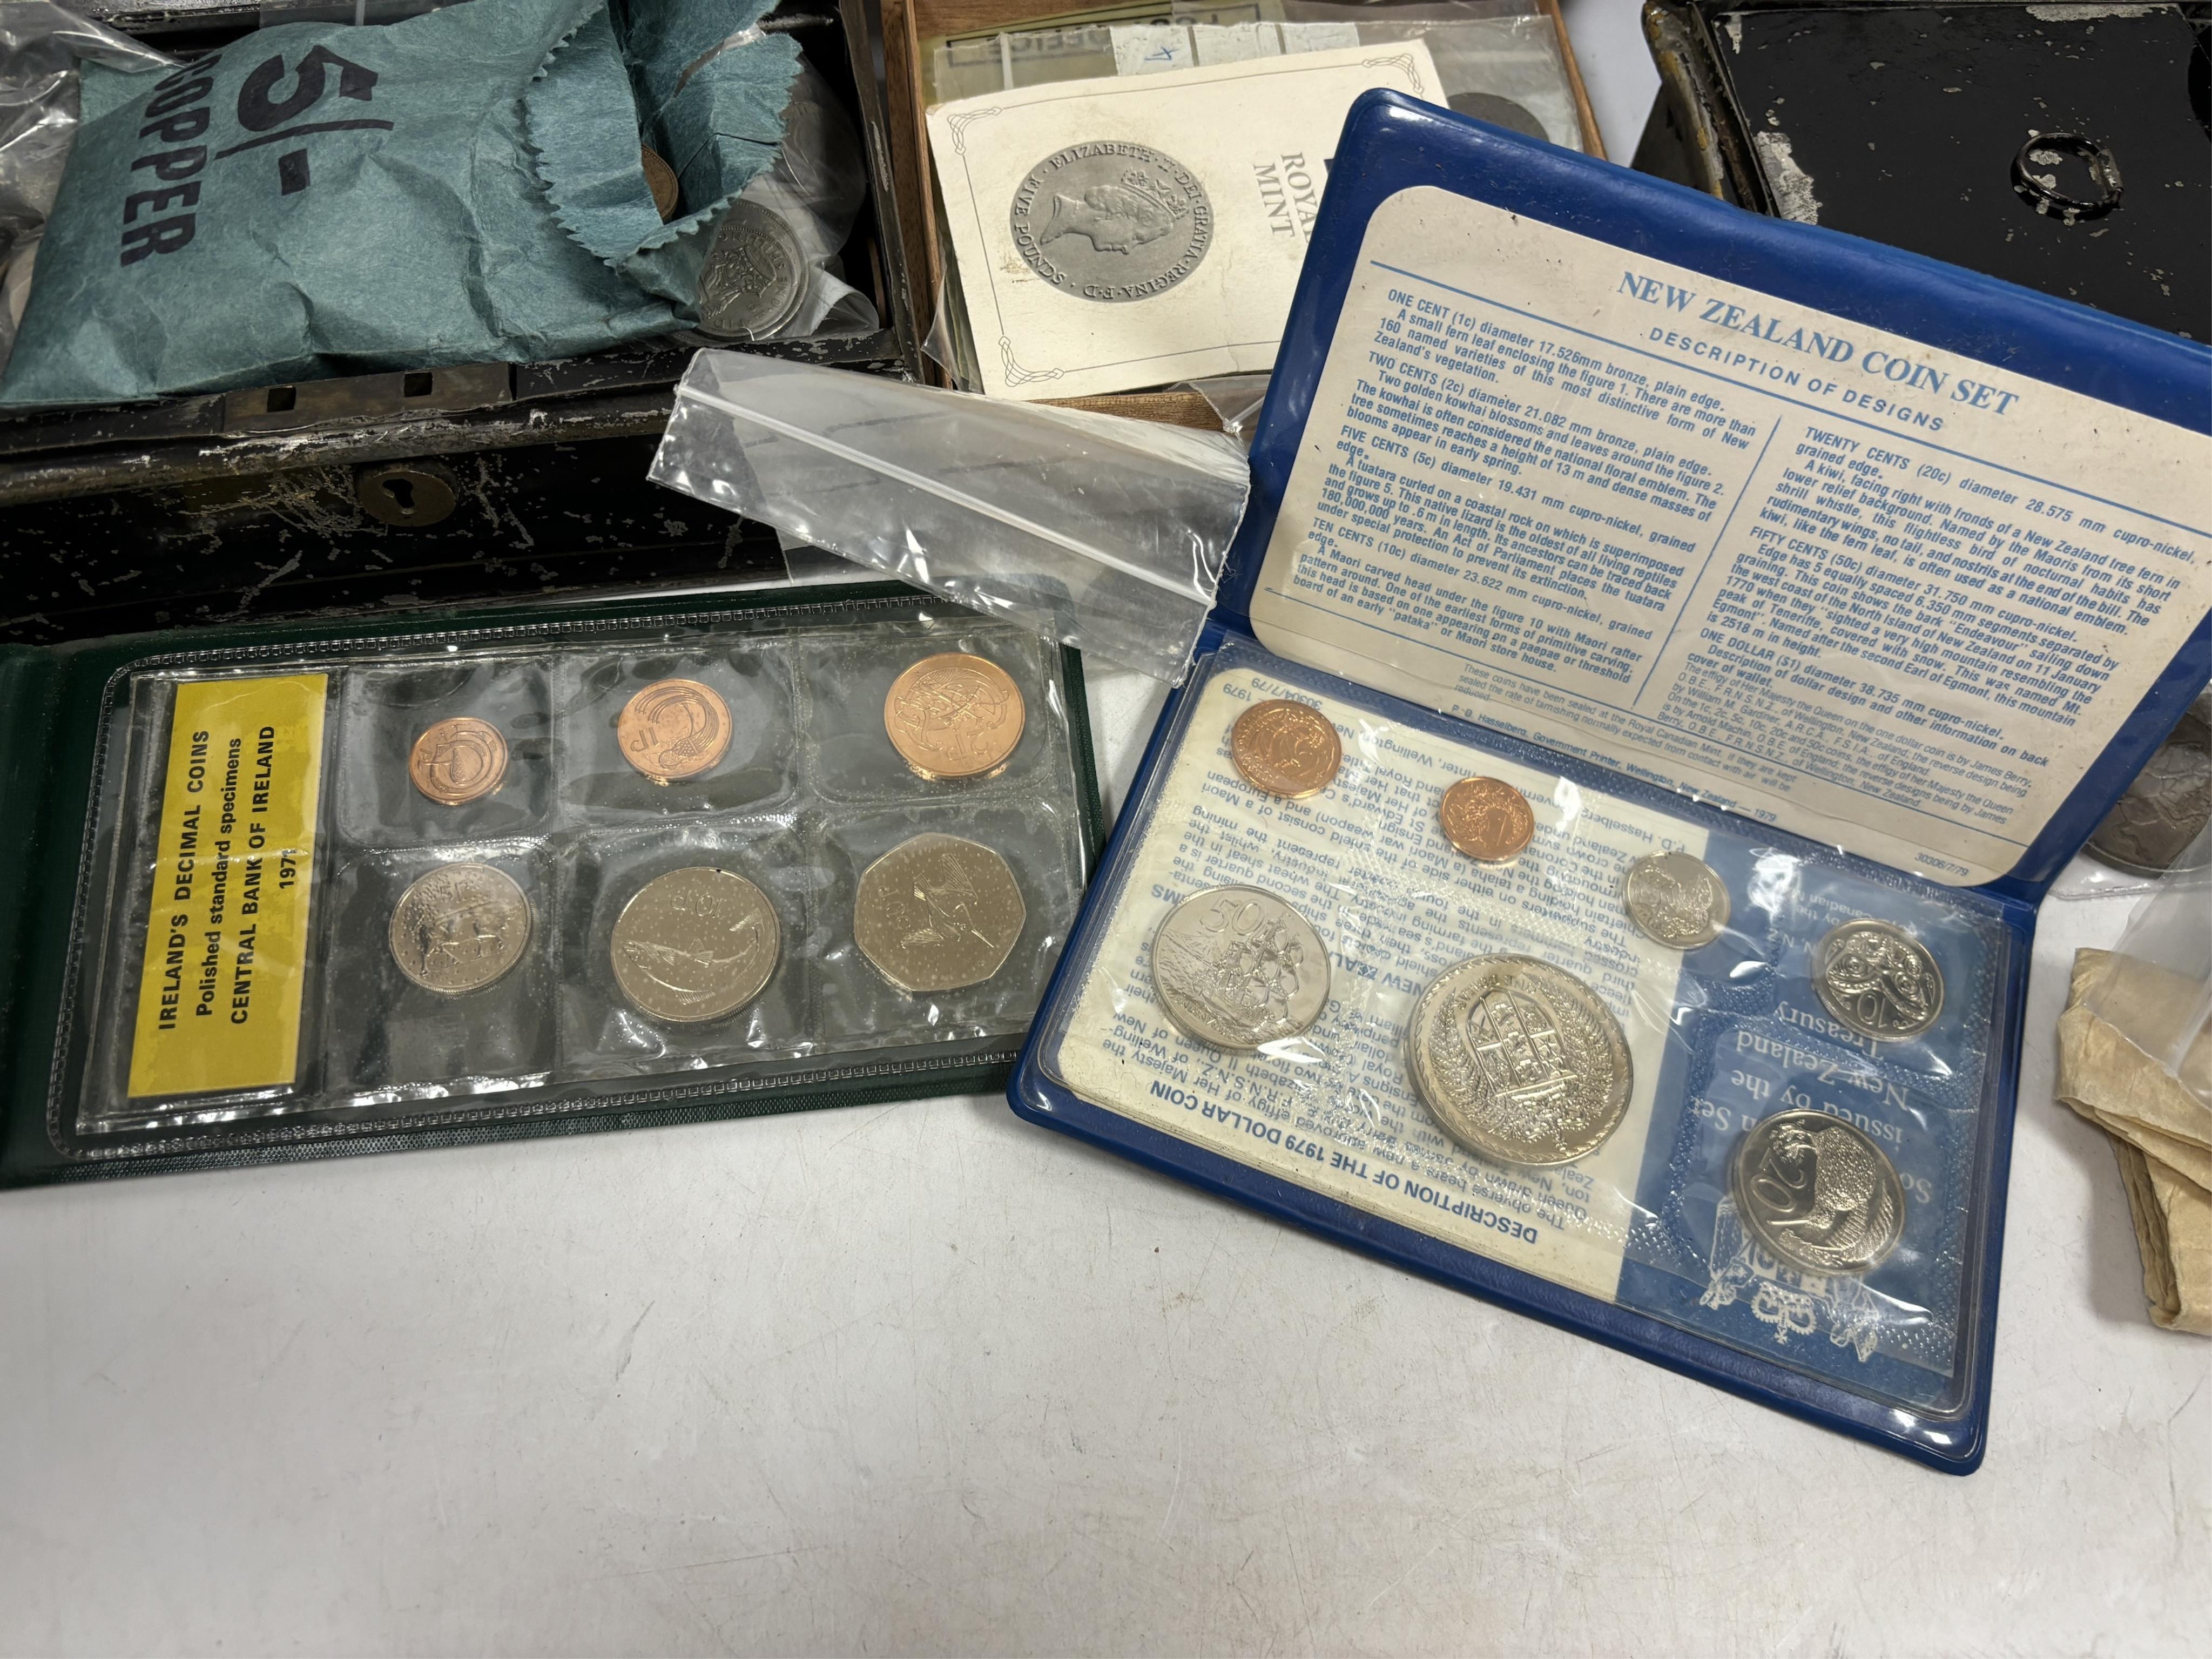 Mostly British coins, 19th/20th century to include two Victoria double florins 1889, good VF, two Victoria crowns 1889 and 1892, Florins to pennies etc.